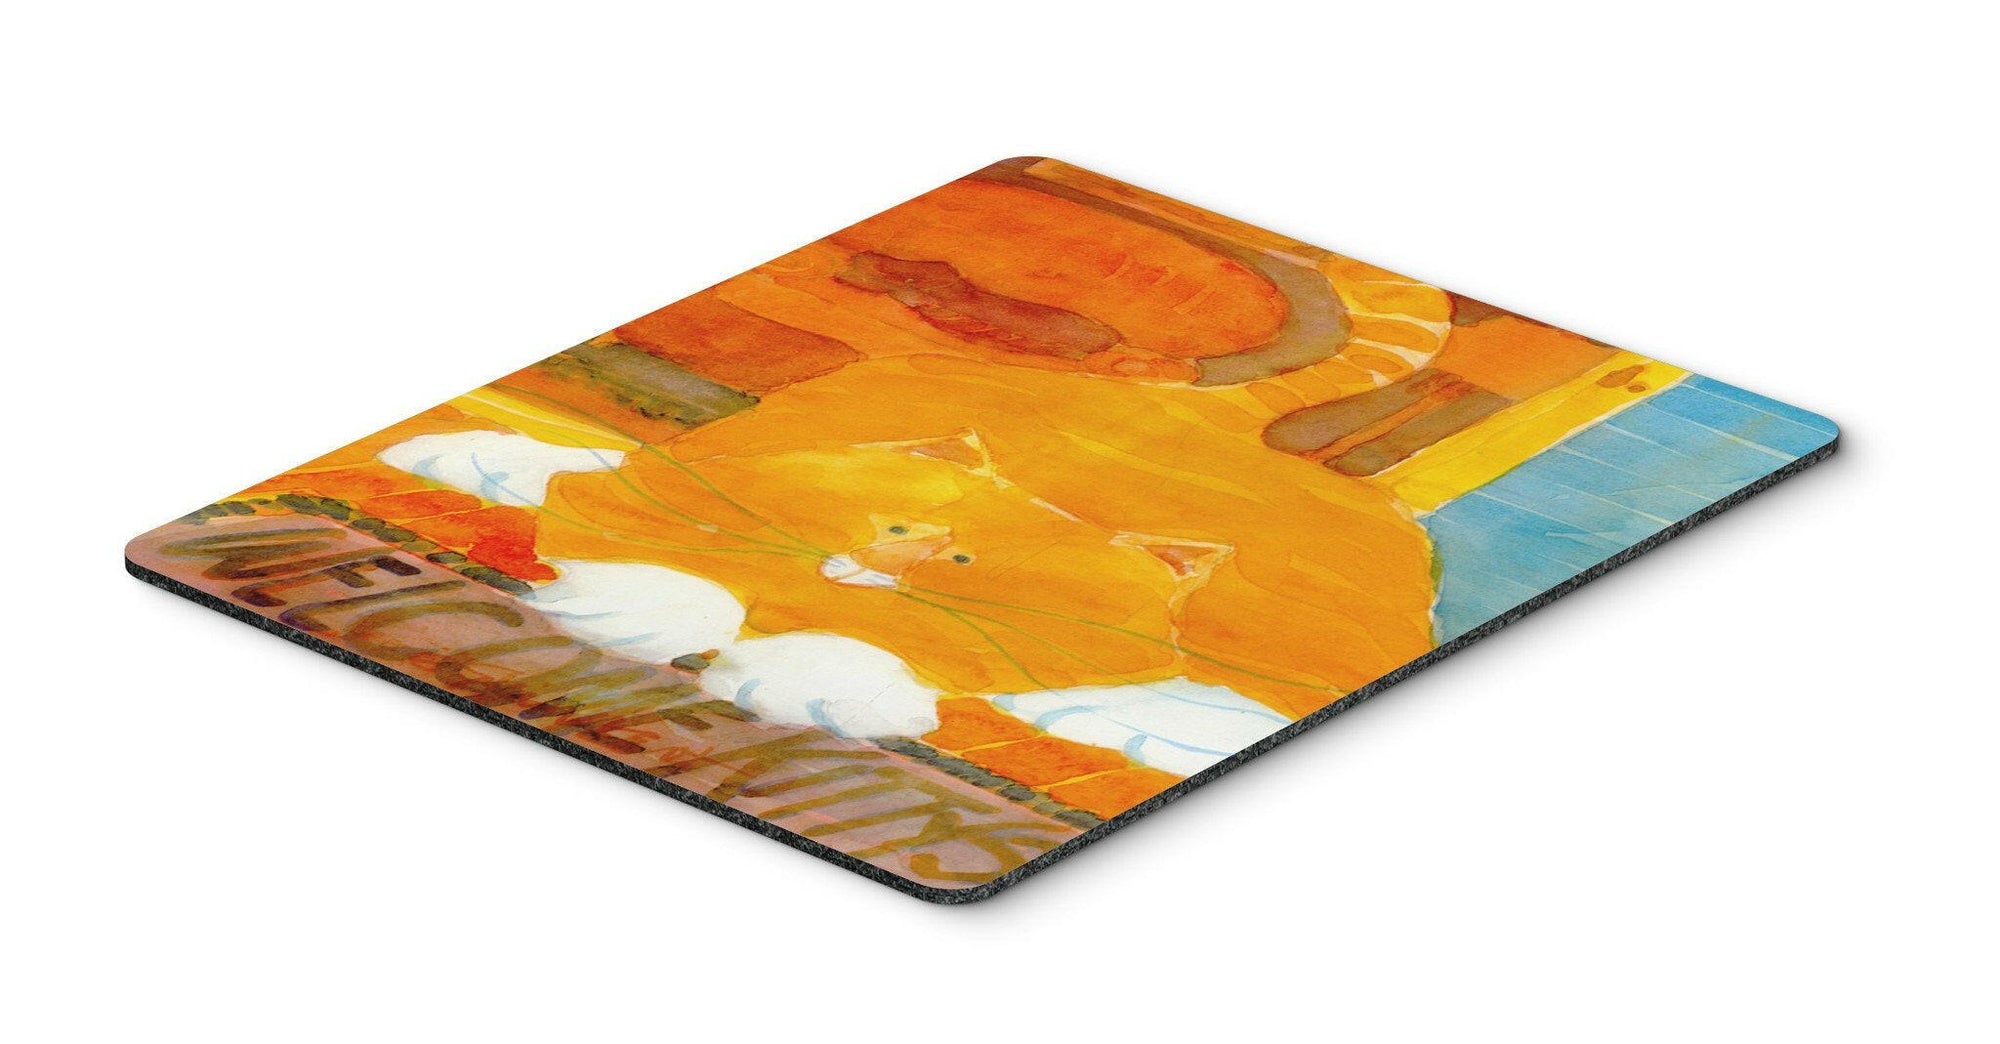 Orange Tabby Welcome Cat  Mouse Pad, Hot Pad or Trivet by Caroline's Treasures